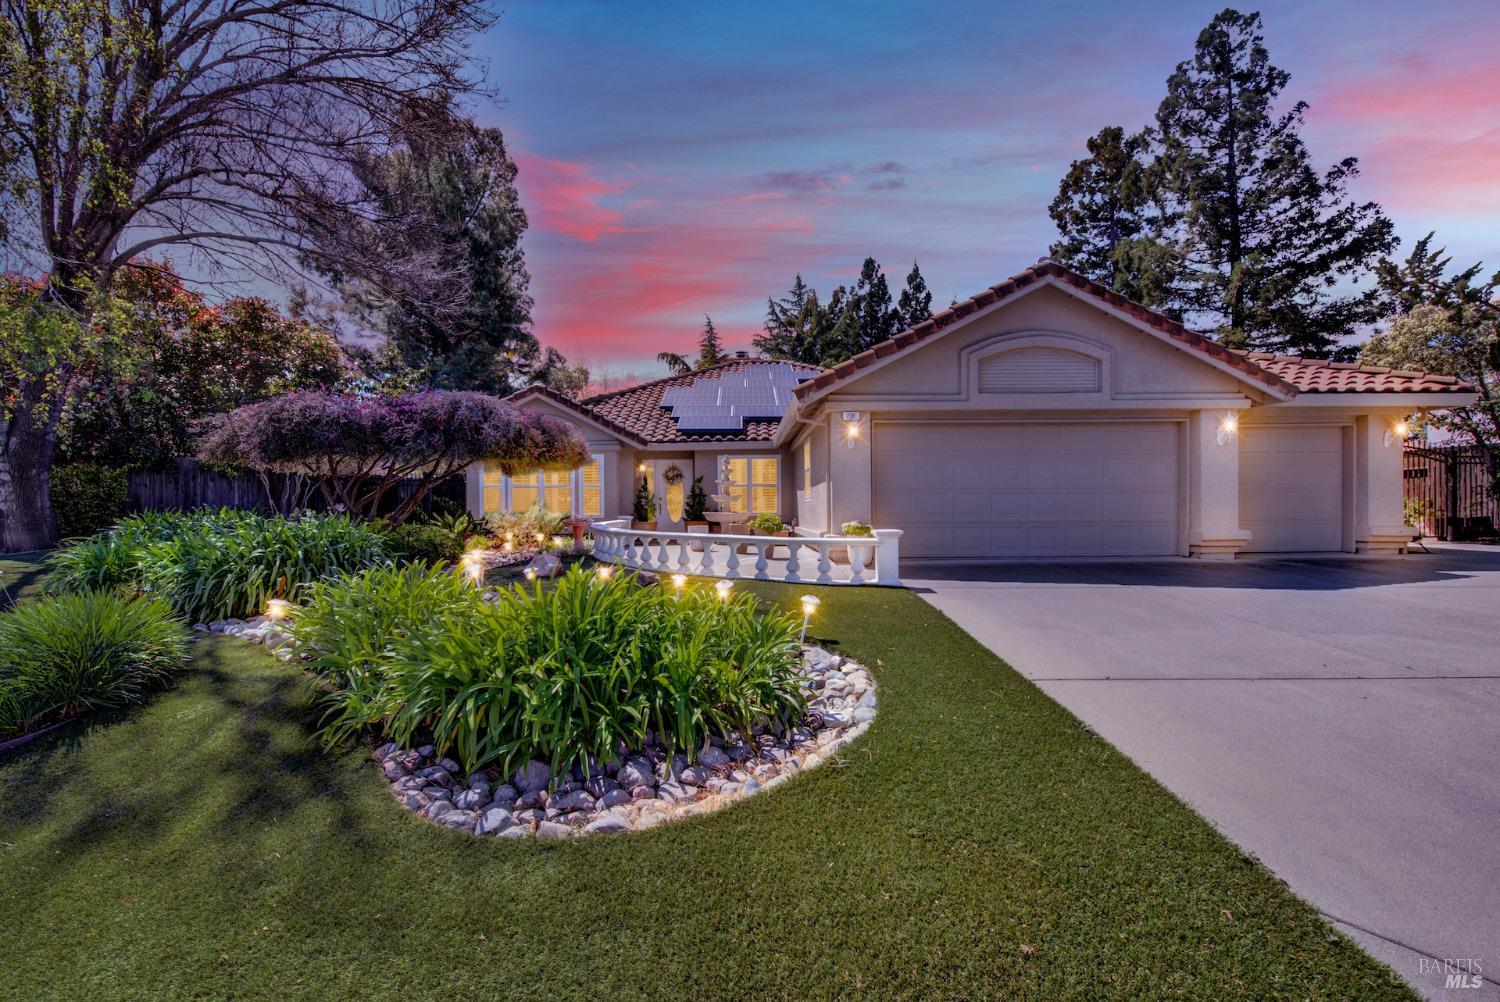 Photo of 236 Fairgate Dr in Vacaville, CA